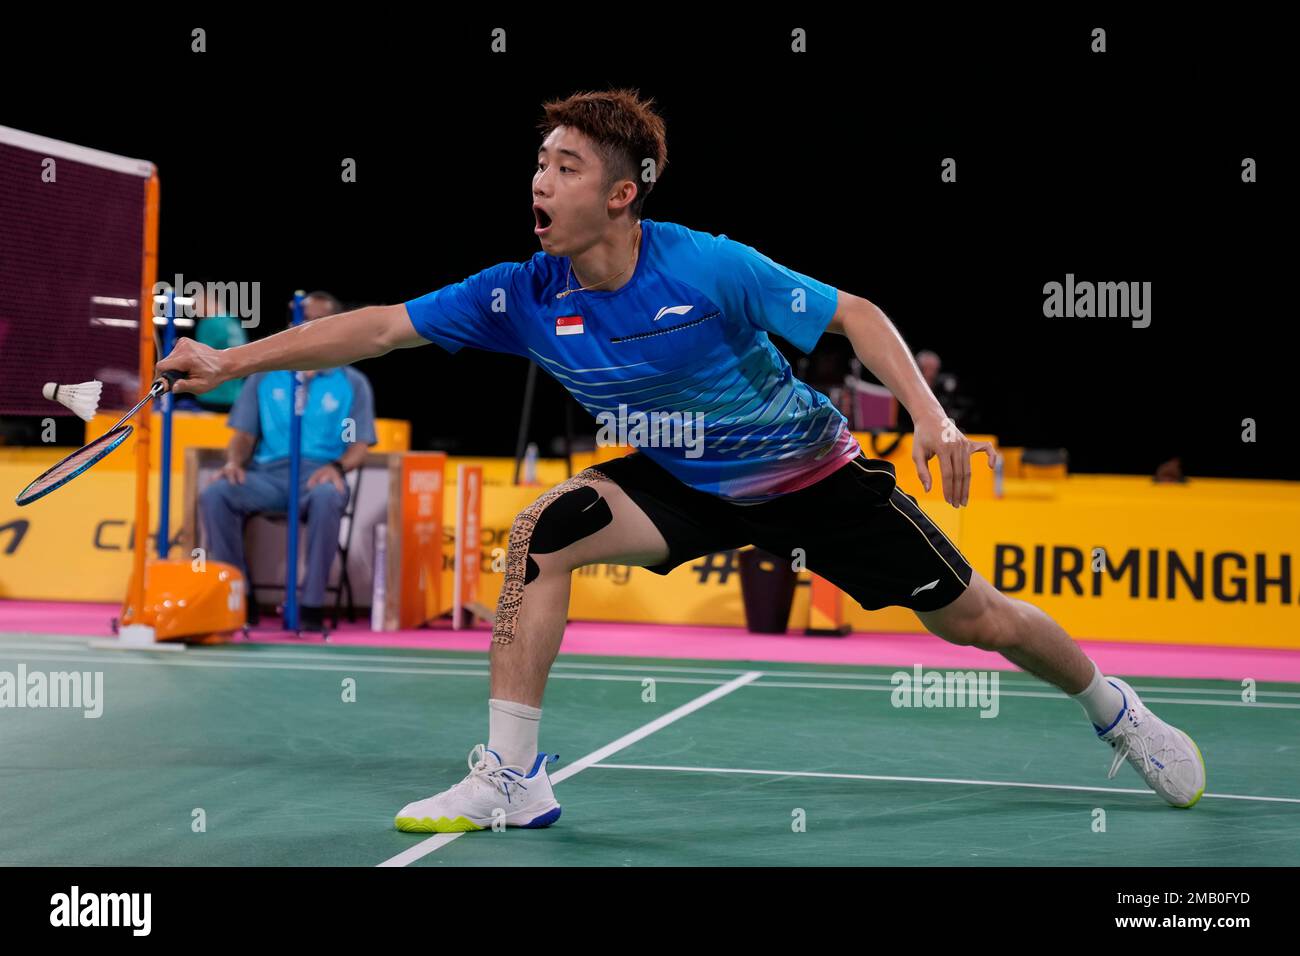 Singapores Jia Heng Teh competes against Kennie Maarten King of Barbados in the mixed team event badminton competition at the Commonwealth Games in Birmingham, England, Friday, July 29, 2022